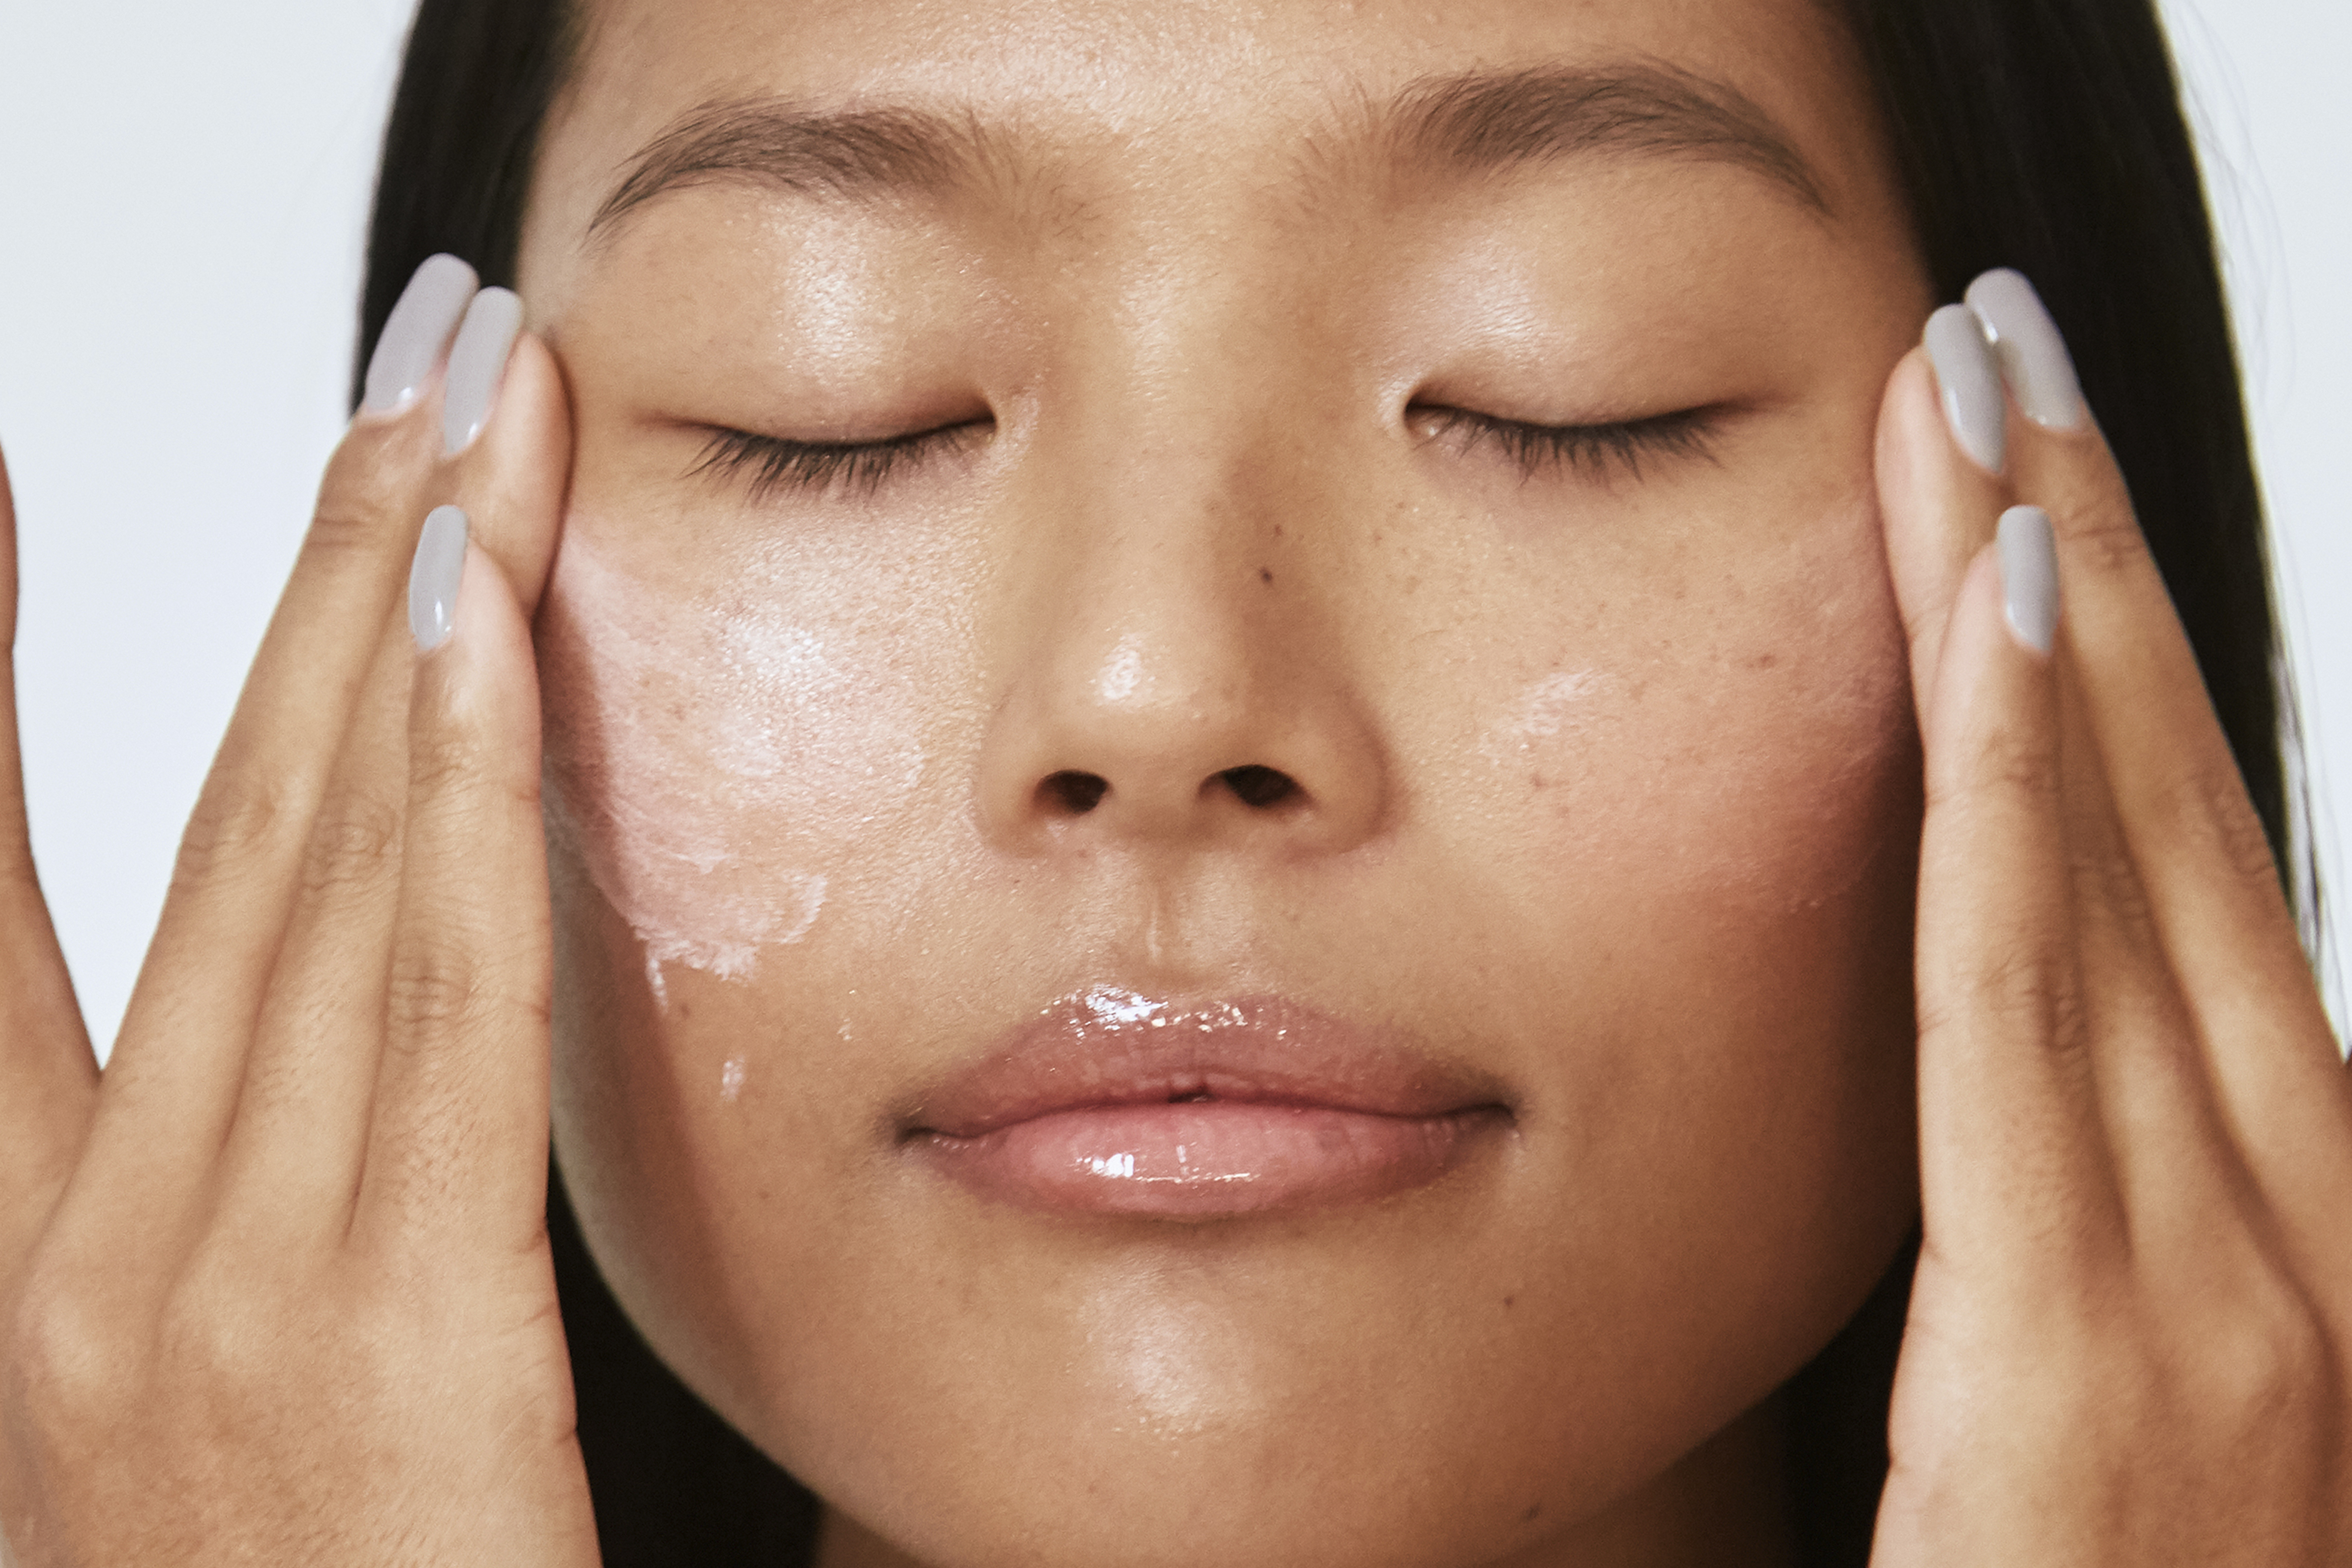 Stress can do real damage to complexion; but even when stress is as unavoidable, there are ways to prevent it from wreaking complete havoc on skin.